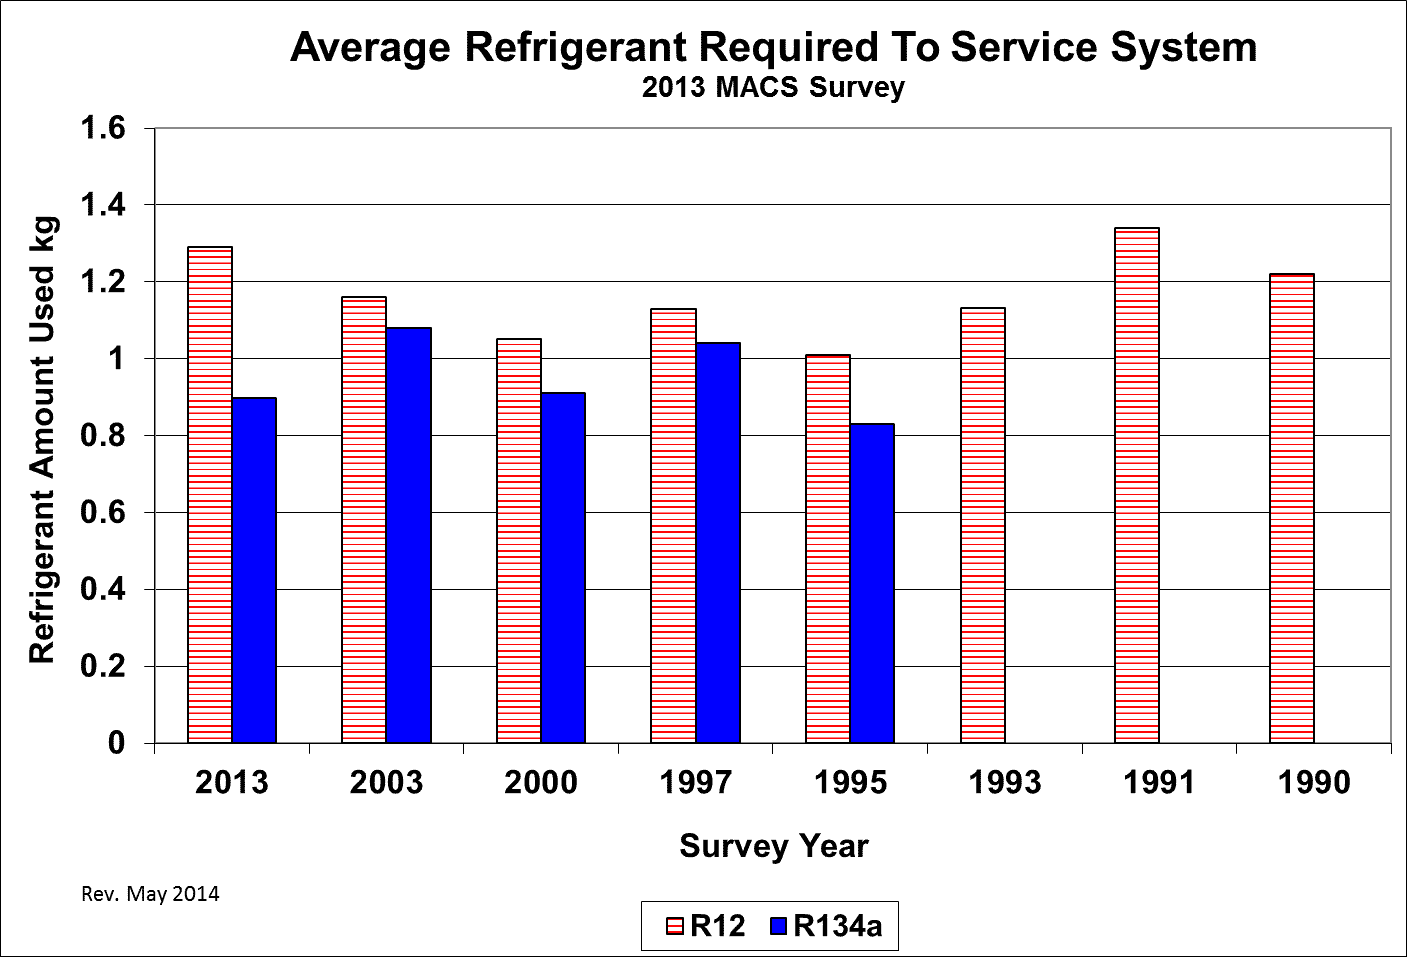 One of the I-MAC goals was to reduce refrigerant system emissions. Reducing the system charge will result in lower emissions when the complete charge is lost due to system damage or failure of component parts. The data in this figure compares system charge amounts from 1990 to 2013. Some of the typical R-134a refrigerant charge amounts for 2015 systems range from 0.36Kg (12.69 oz.) to 0.7Kg (24.69 oz.) for single evaporator systems. 